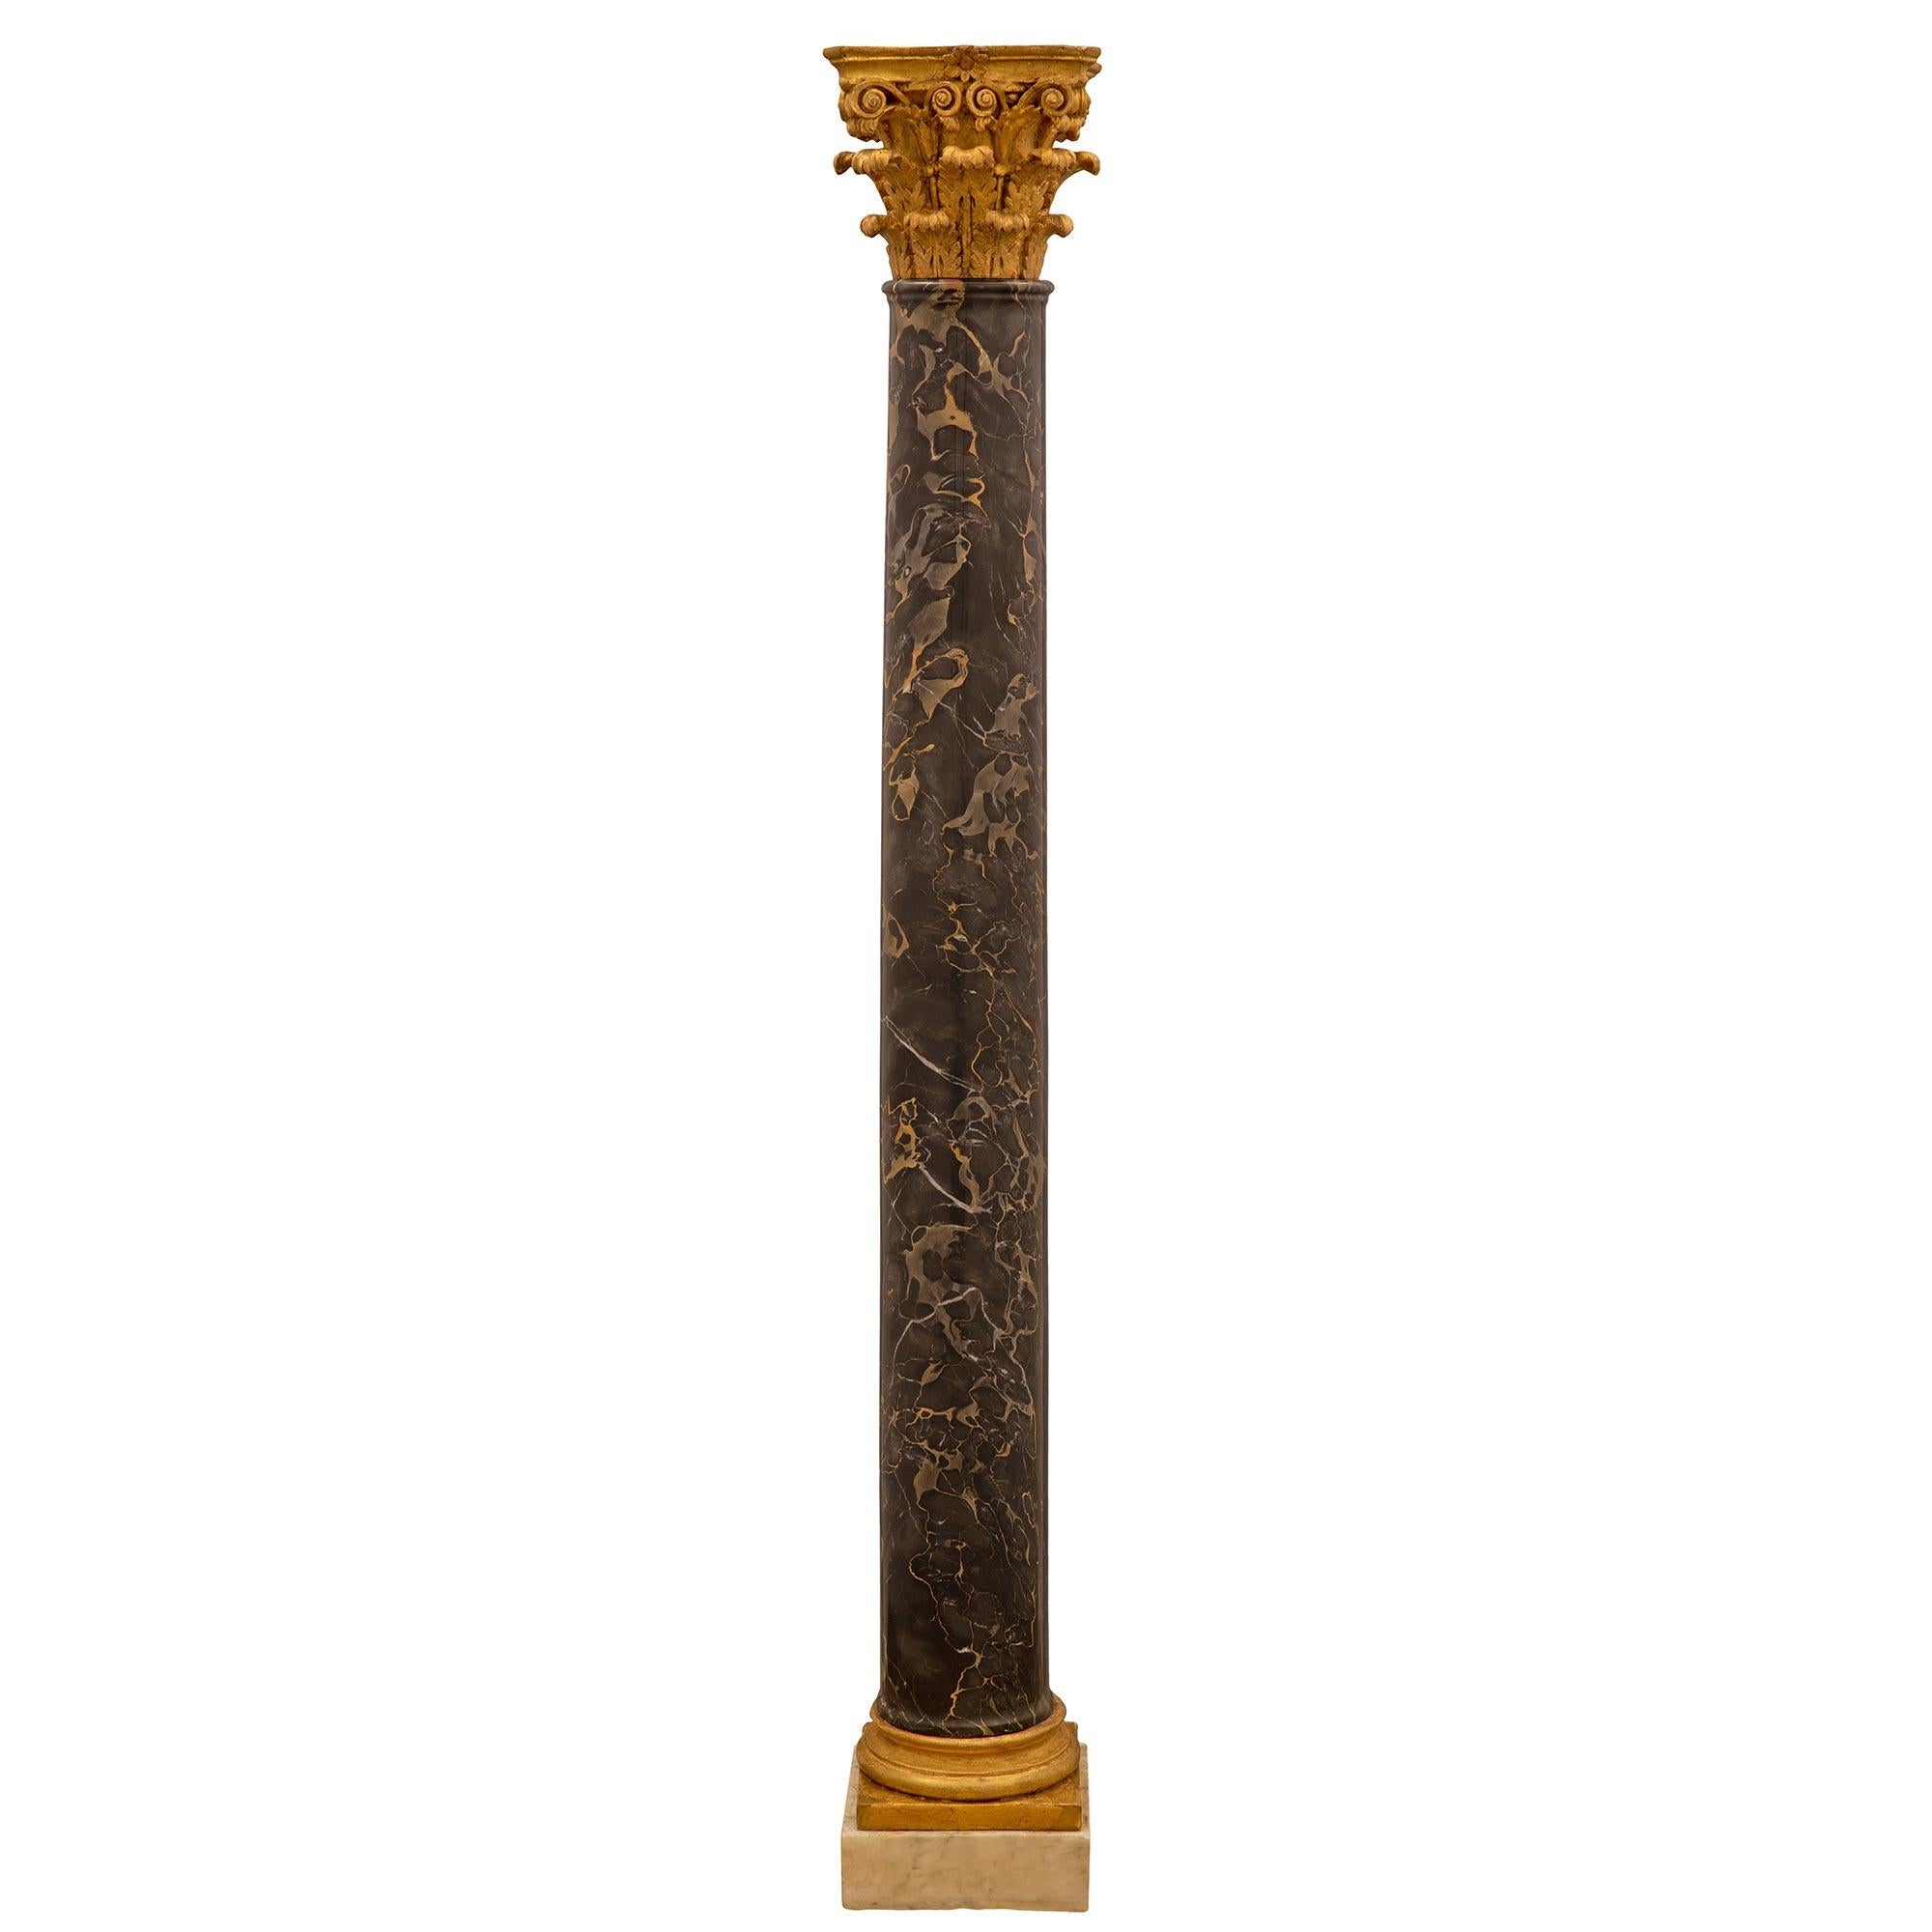 A striking and very high quality pair of Italian late 18th/early 19th century onyx, giltwood and portoro marble columns. Each column is raised by a square onyx base below an elegant mottled square and circular giltwood reserve. The impressive solid